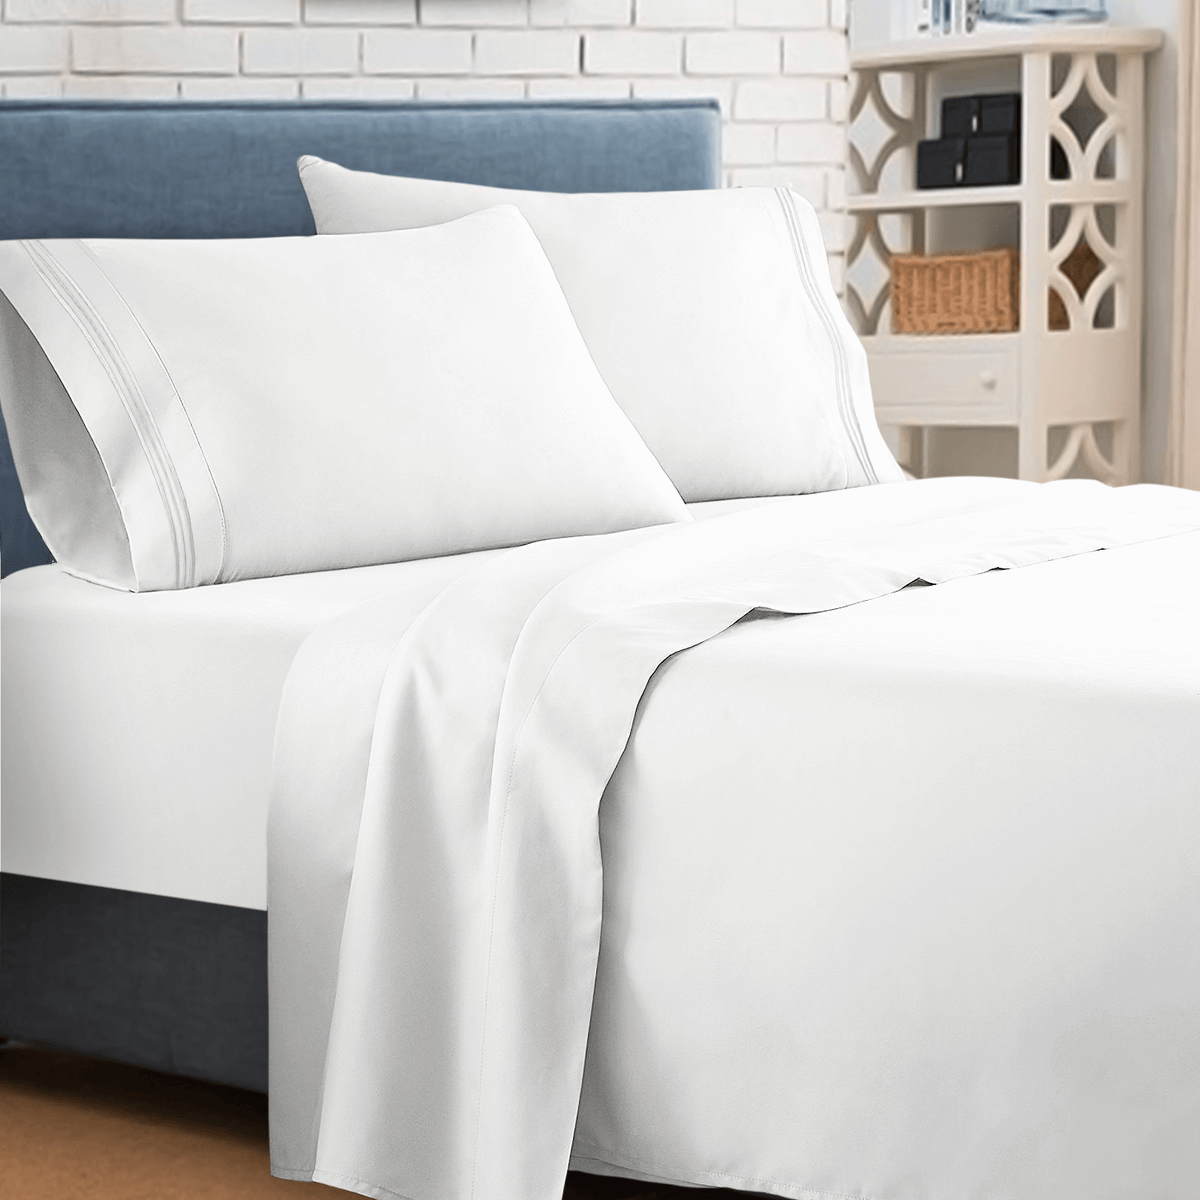 The Ultimate Guide to Choosing the Best Bed Sheets for Airbnb/Hotel Ow ...